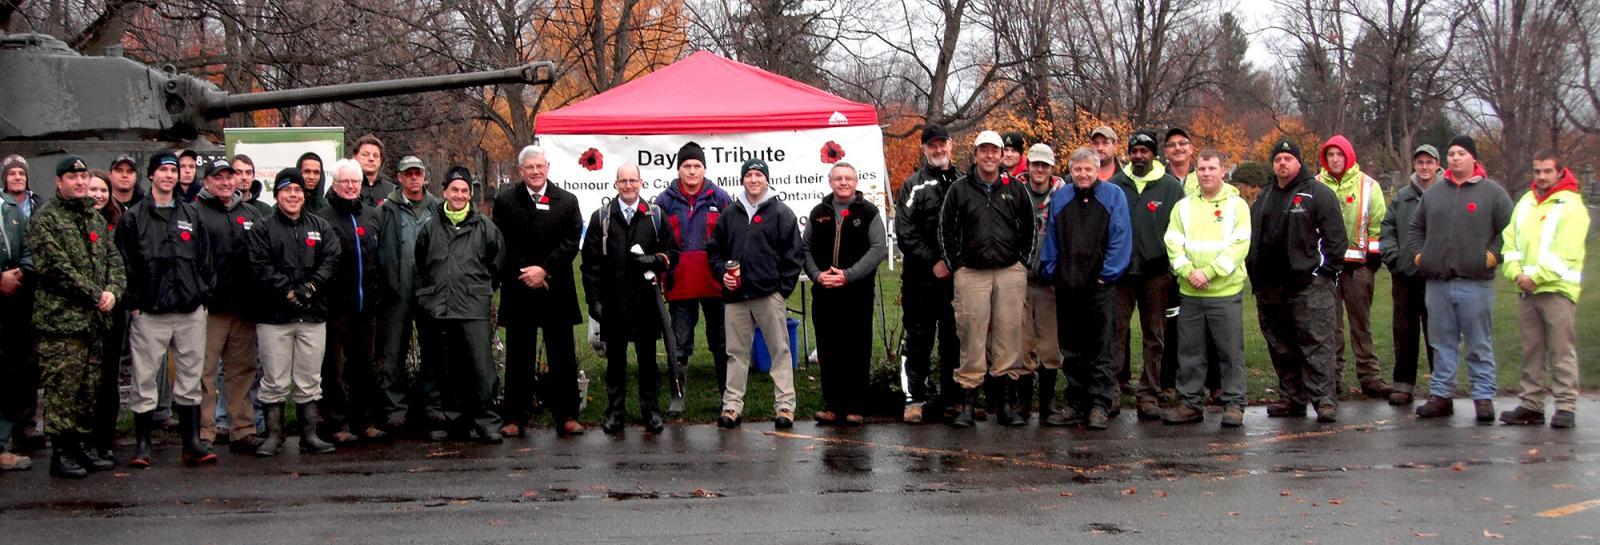 The Day of Tribute has become a major community-building project for the Ottawa Chapter.